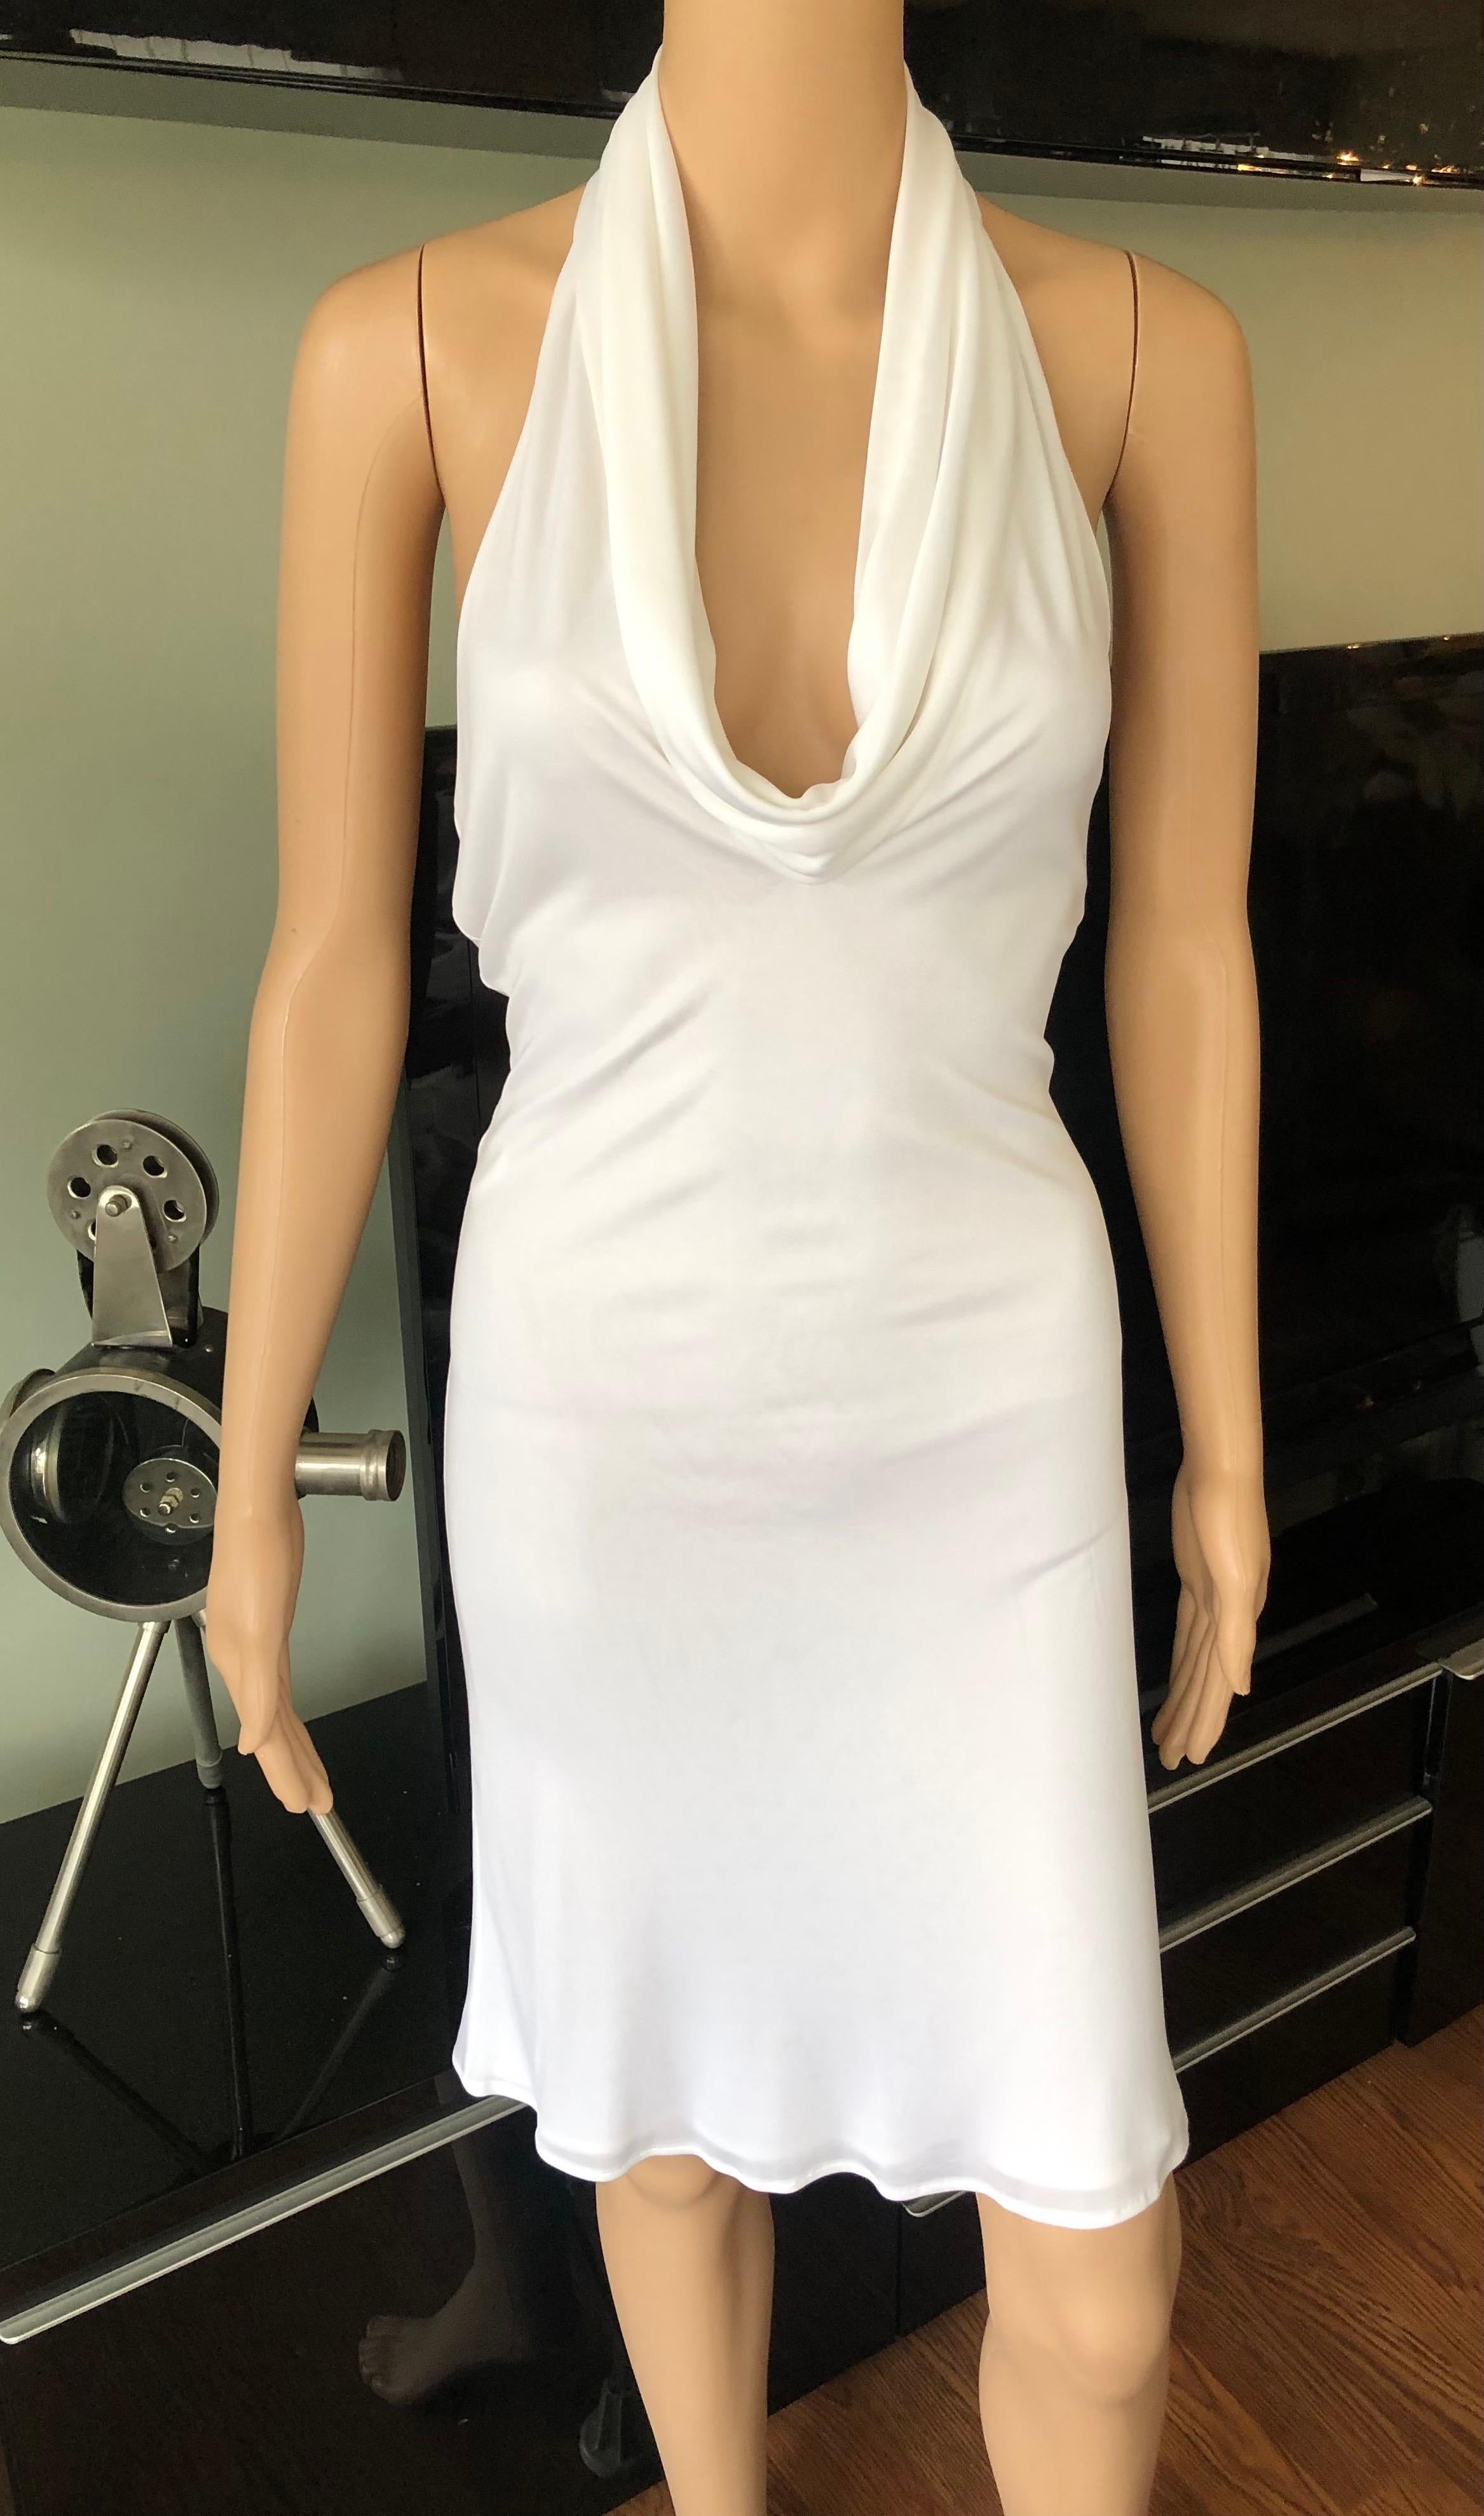 Women's Gianni Versace S/S 2001 Runway Vintage Backless Plunged White Dress